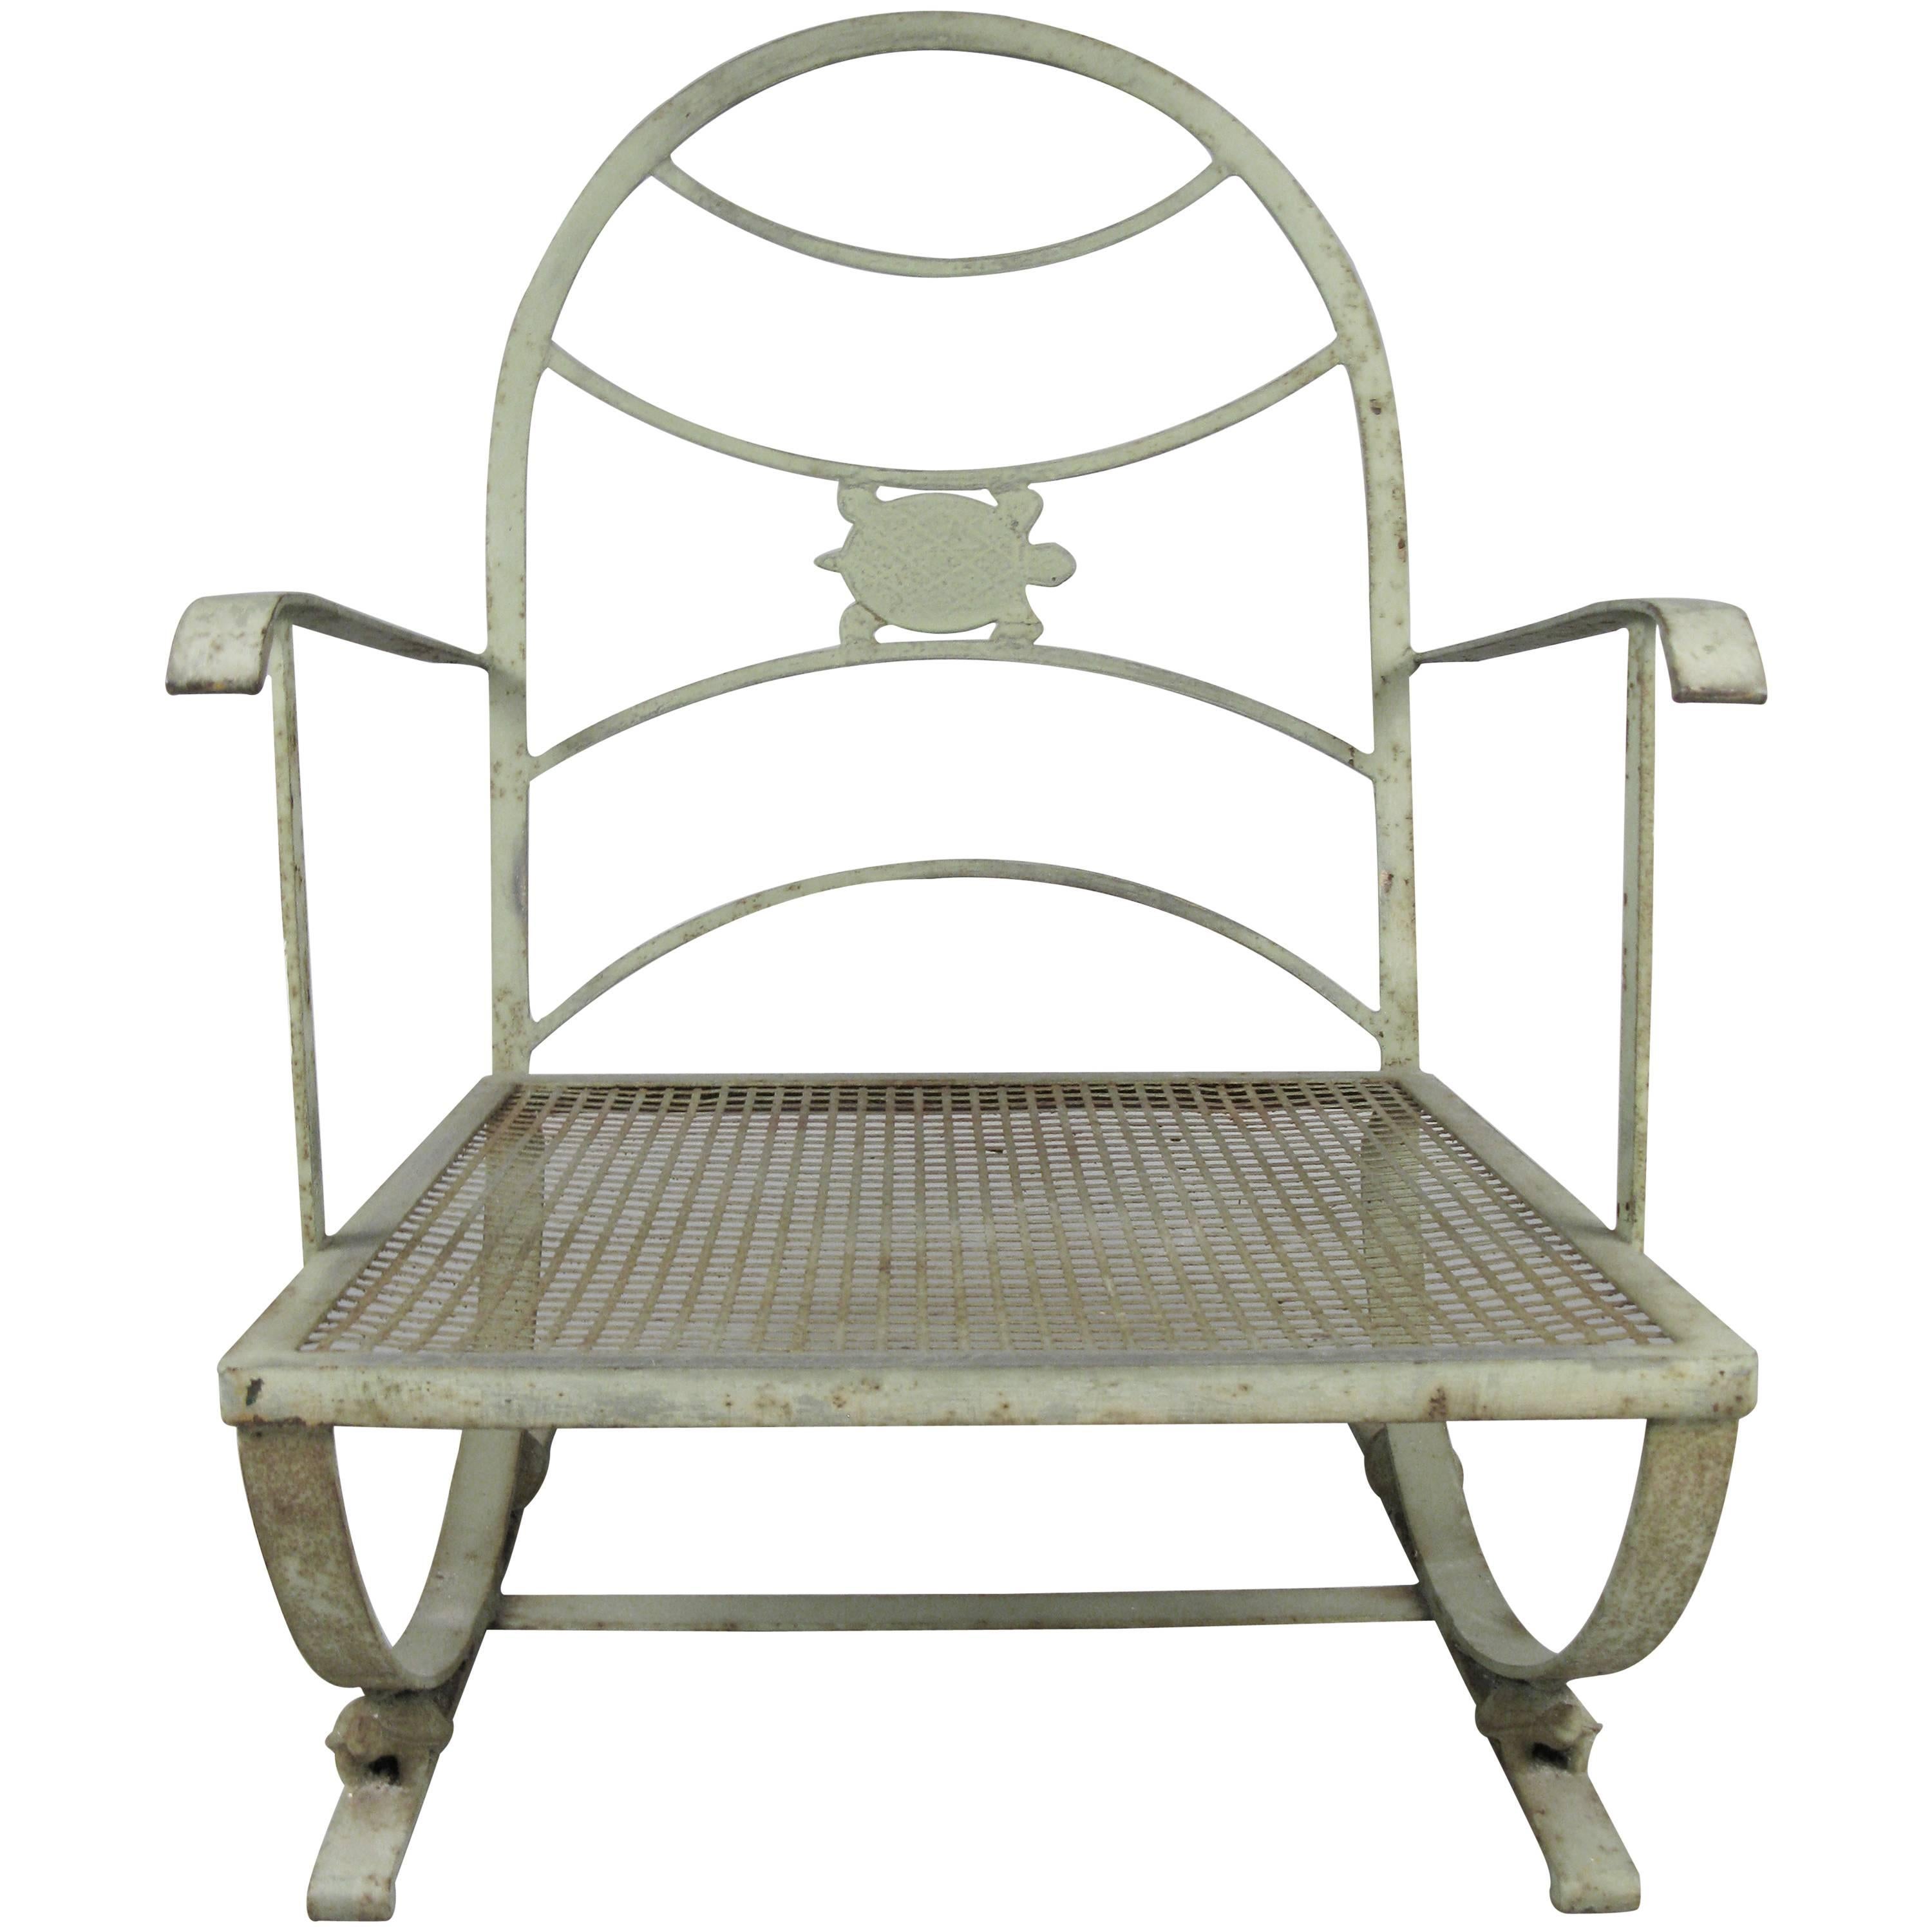 Vintage Wrought Iron Turtle Lounge Chair